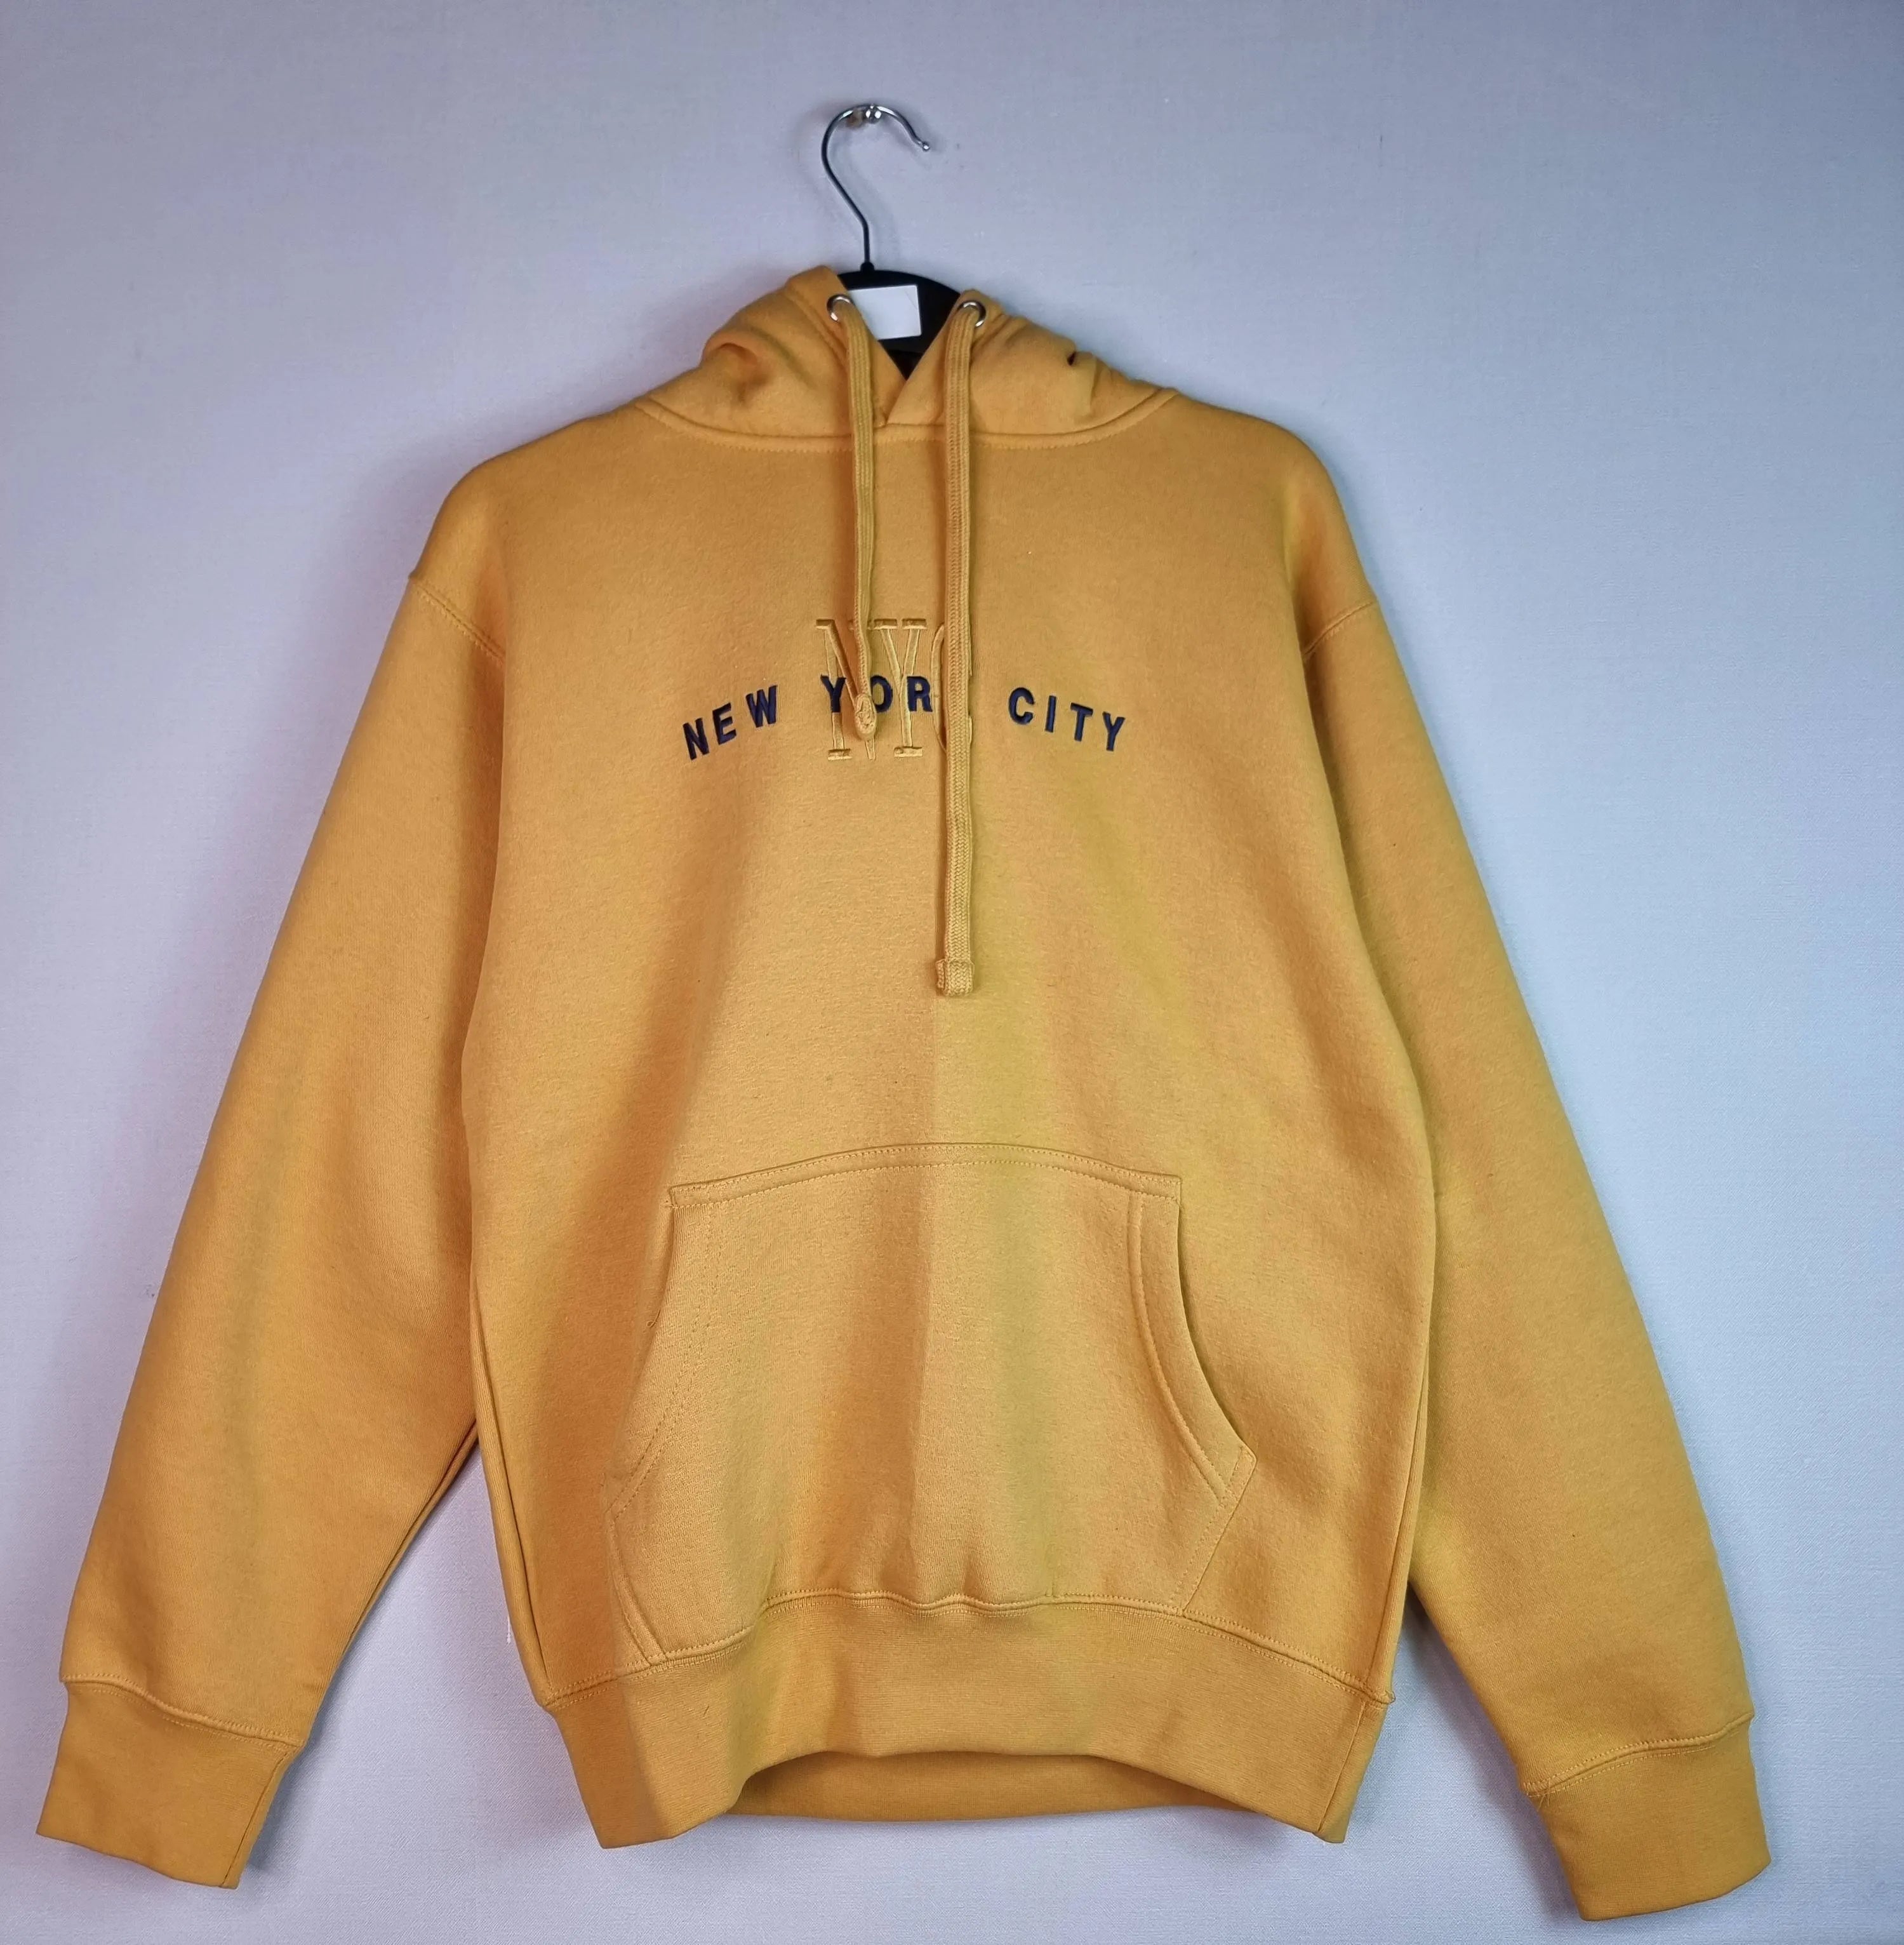  Brighten your day: Stay warm and visible in this cheerful unisex yellow hoodie from Go For It New York.Wrap yourself in the comfort of this NYC-inspired hoodie, wherever you are.